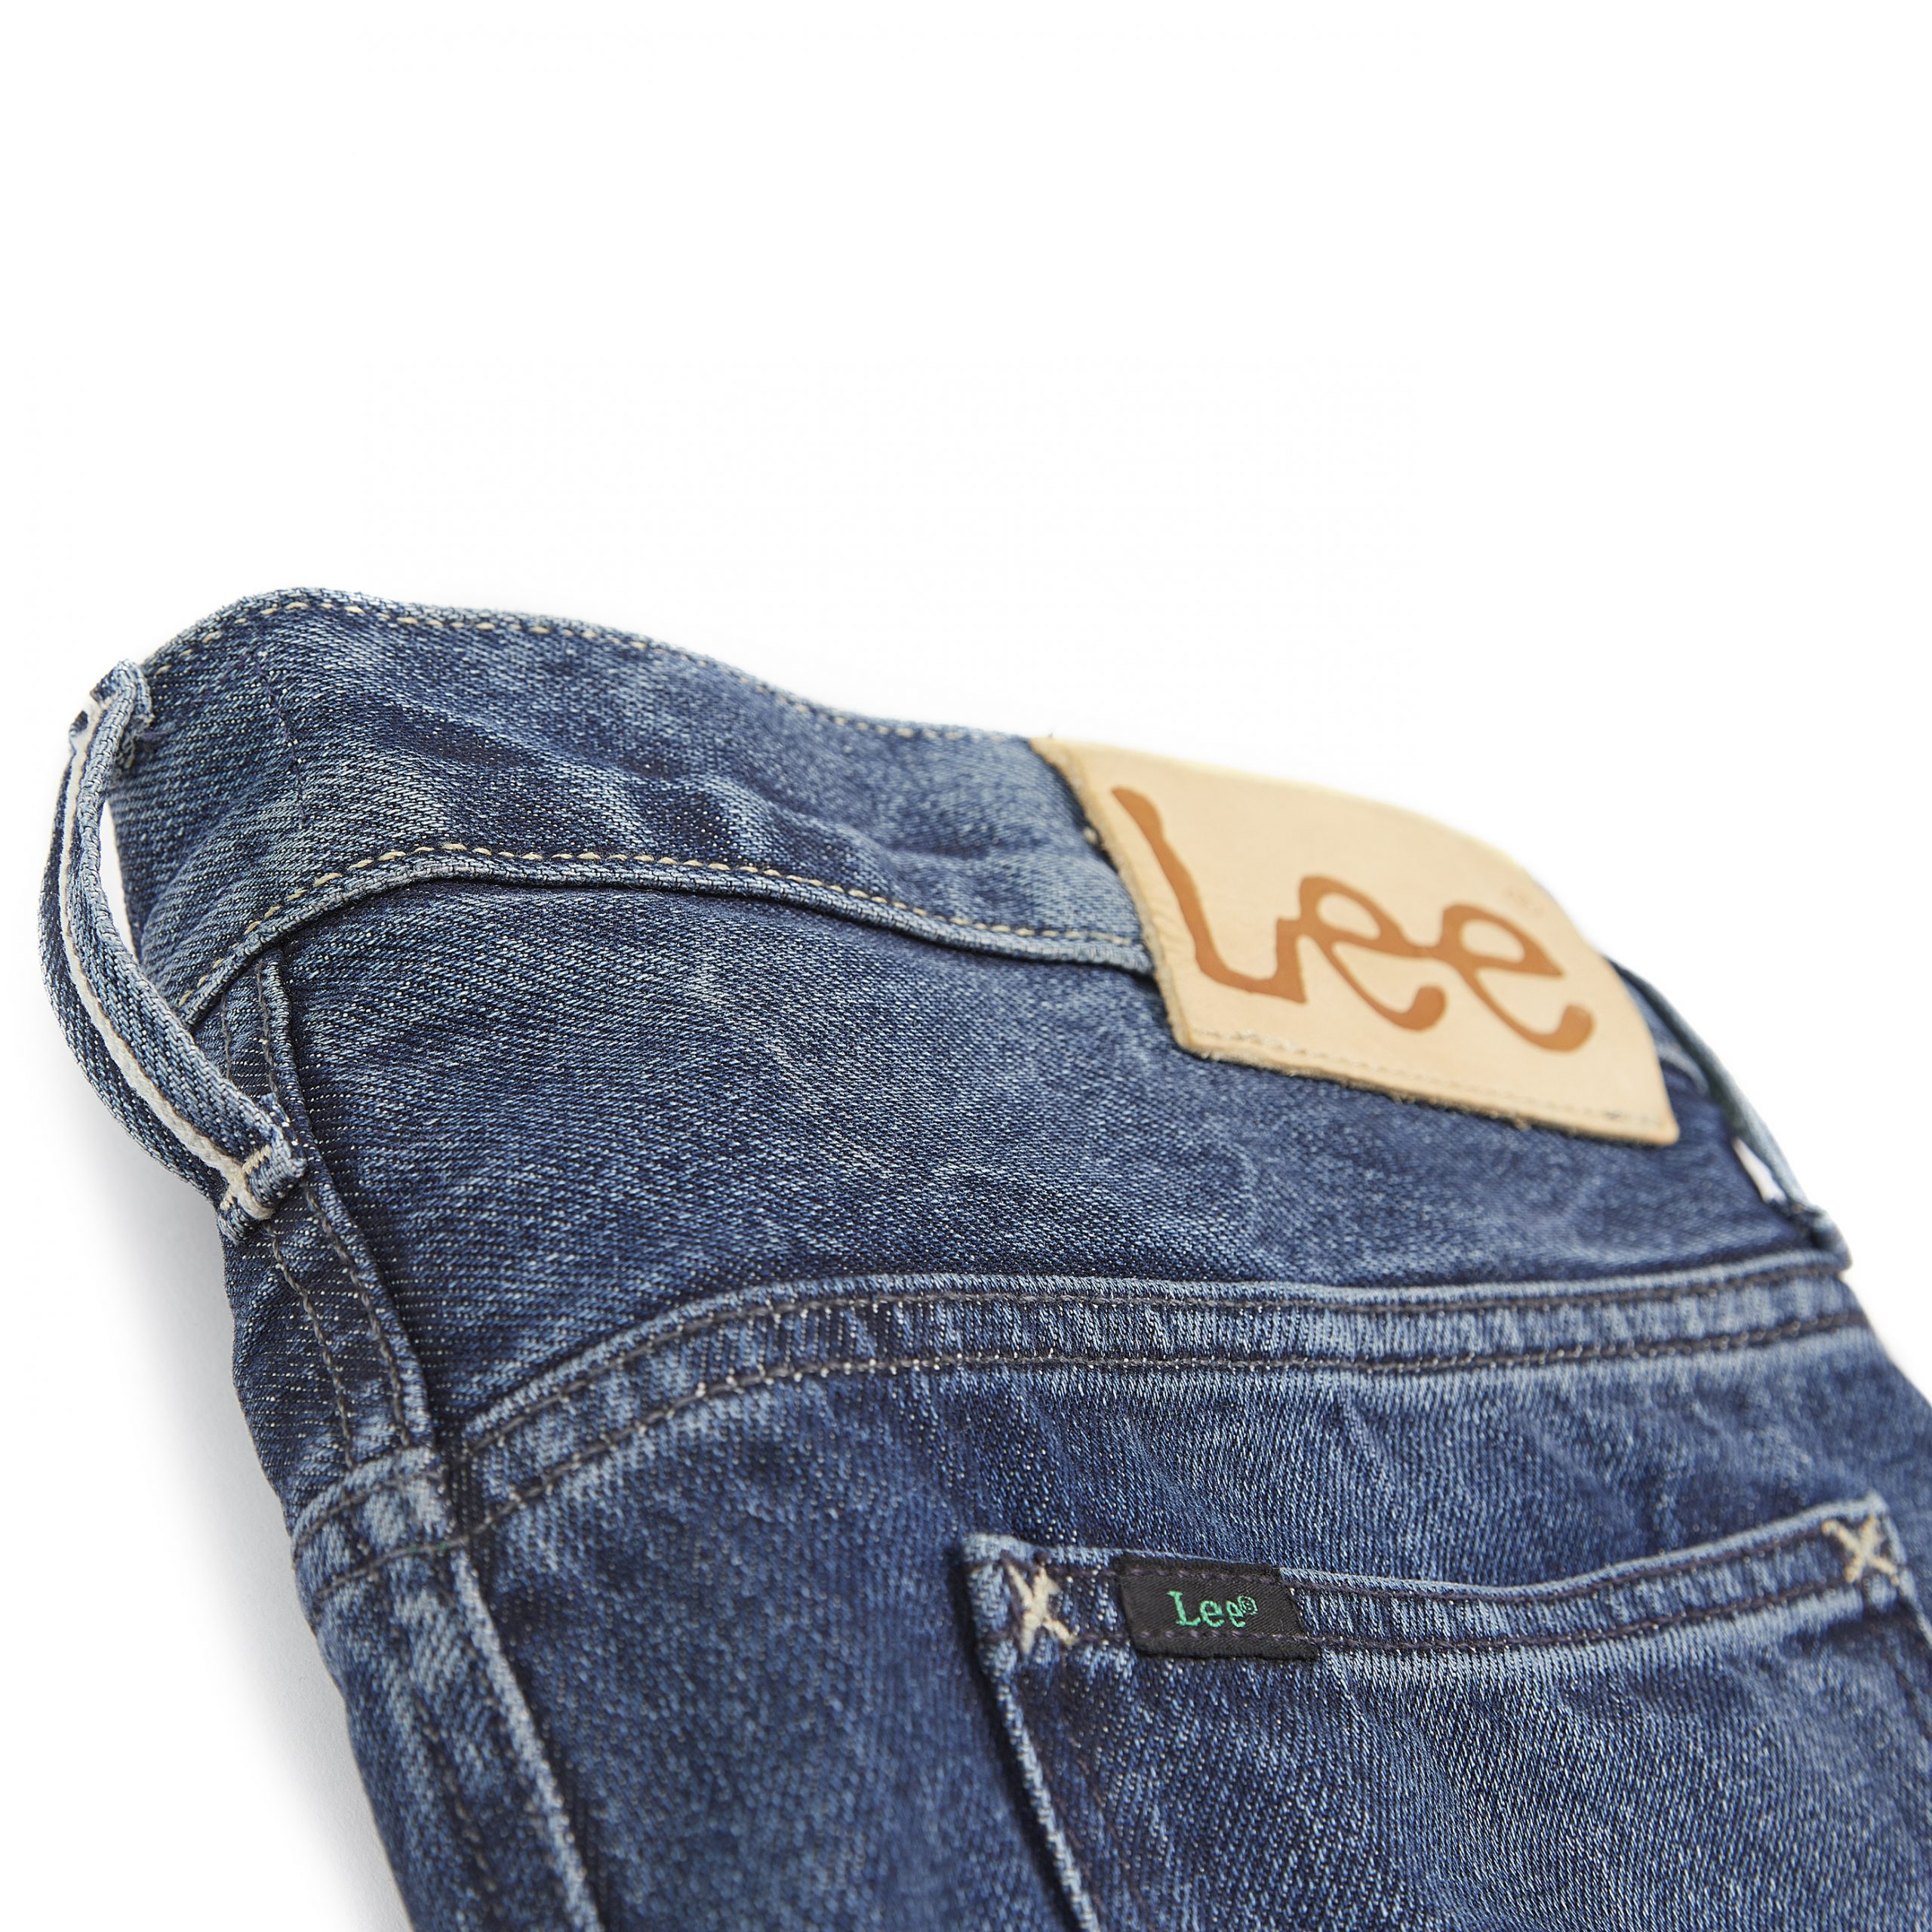 Lee Jeans introduces 'For A World That Works' Initiative - Denimandjeans, Global Trends, News and Reports